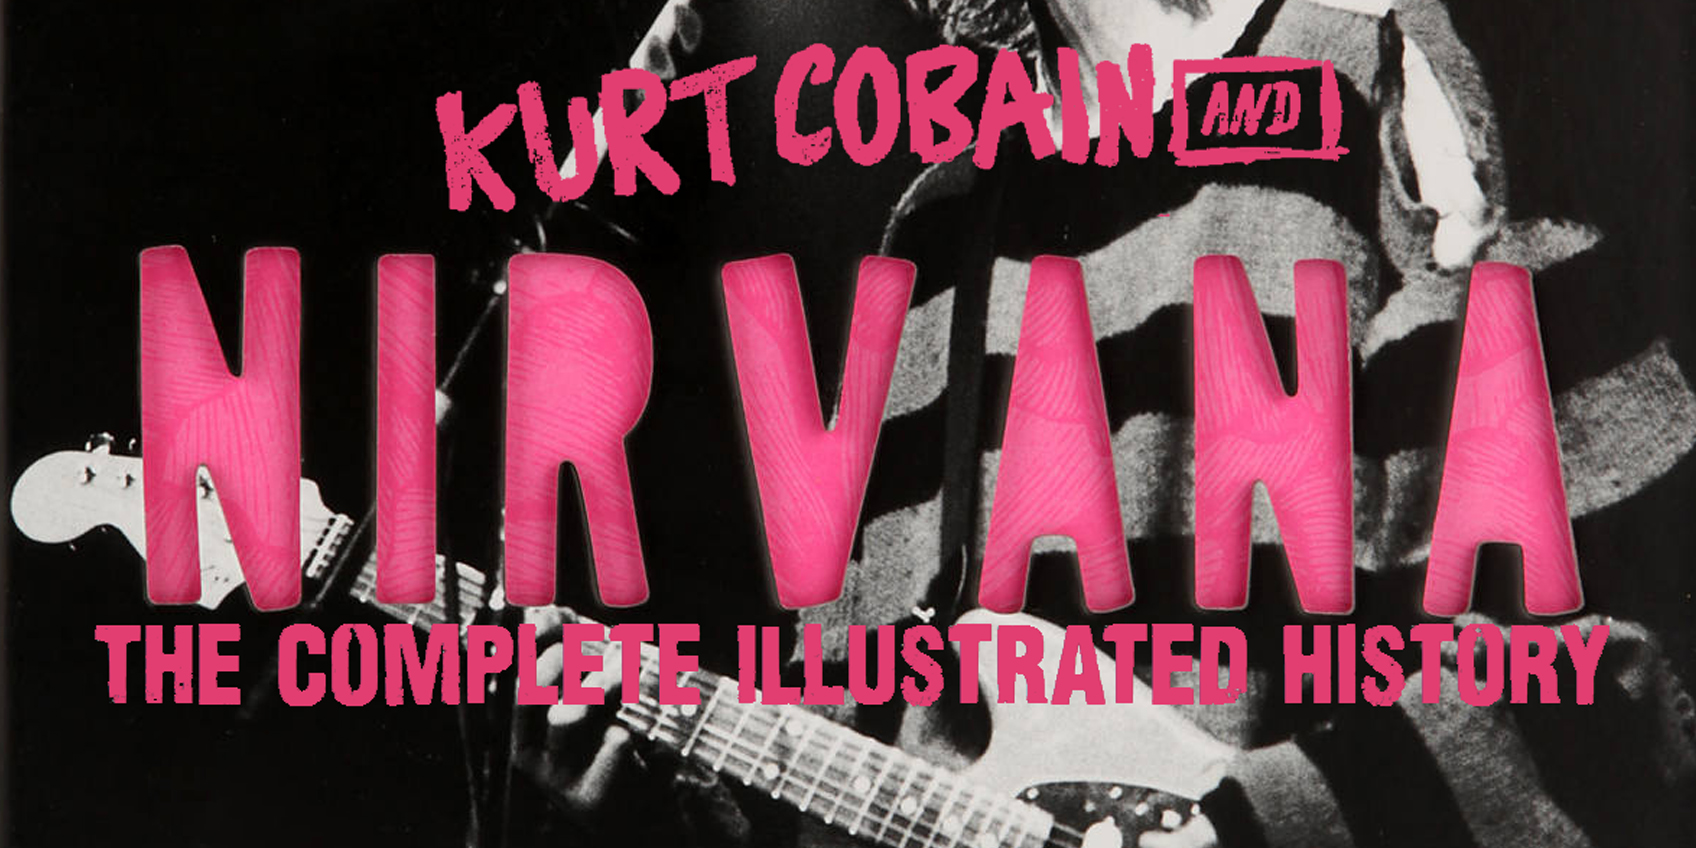 Kurt Cobain and Nirvana – The Complete Illustrated History